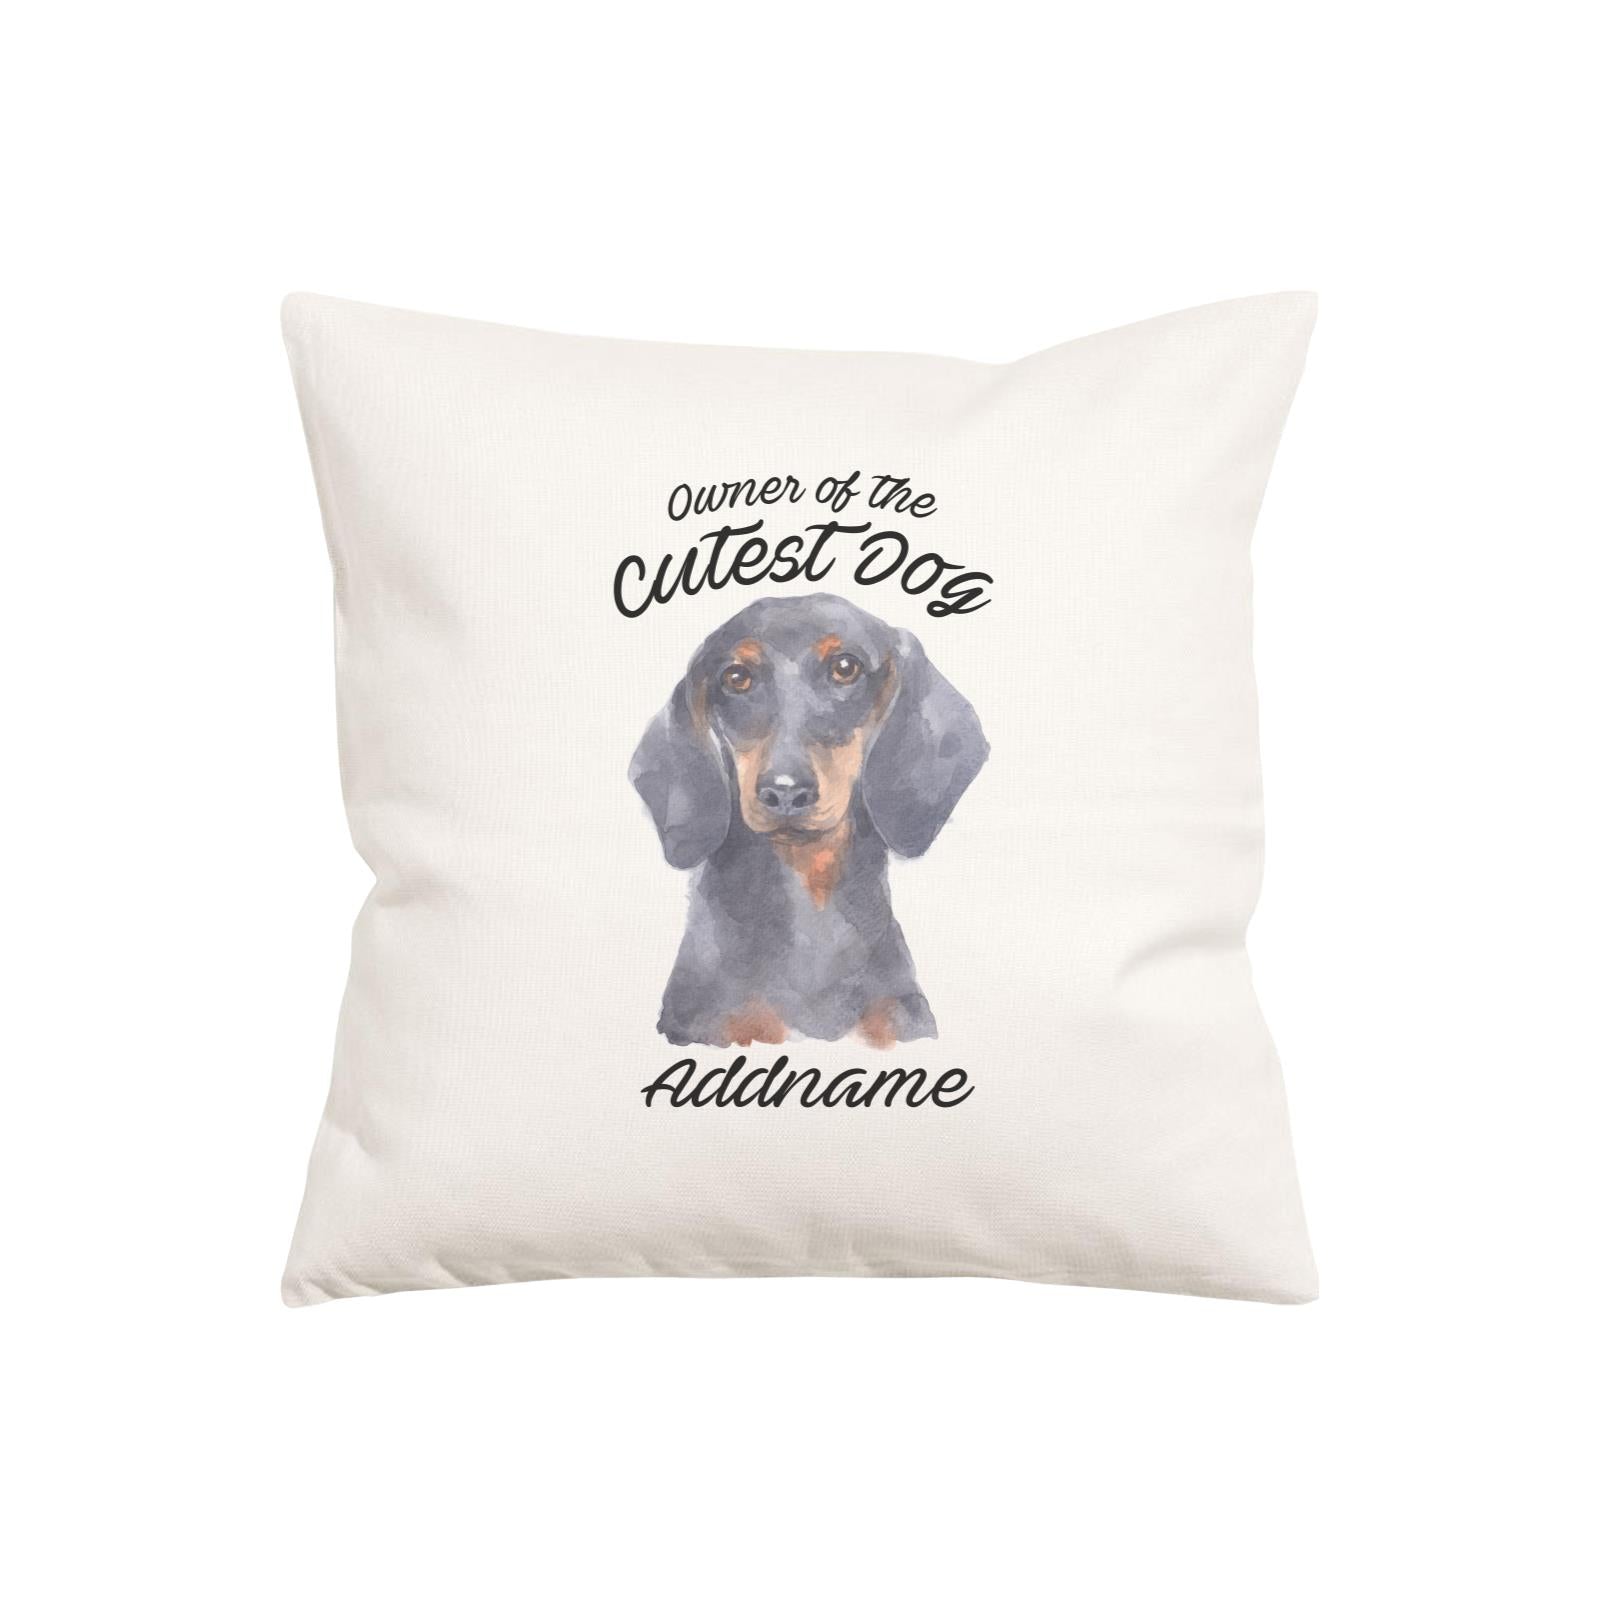 Watercolor Dog Owner Of The Cutest Dog Dachshund Addname Pillow Cushion